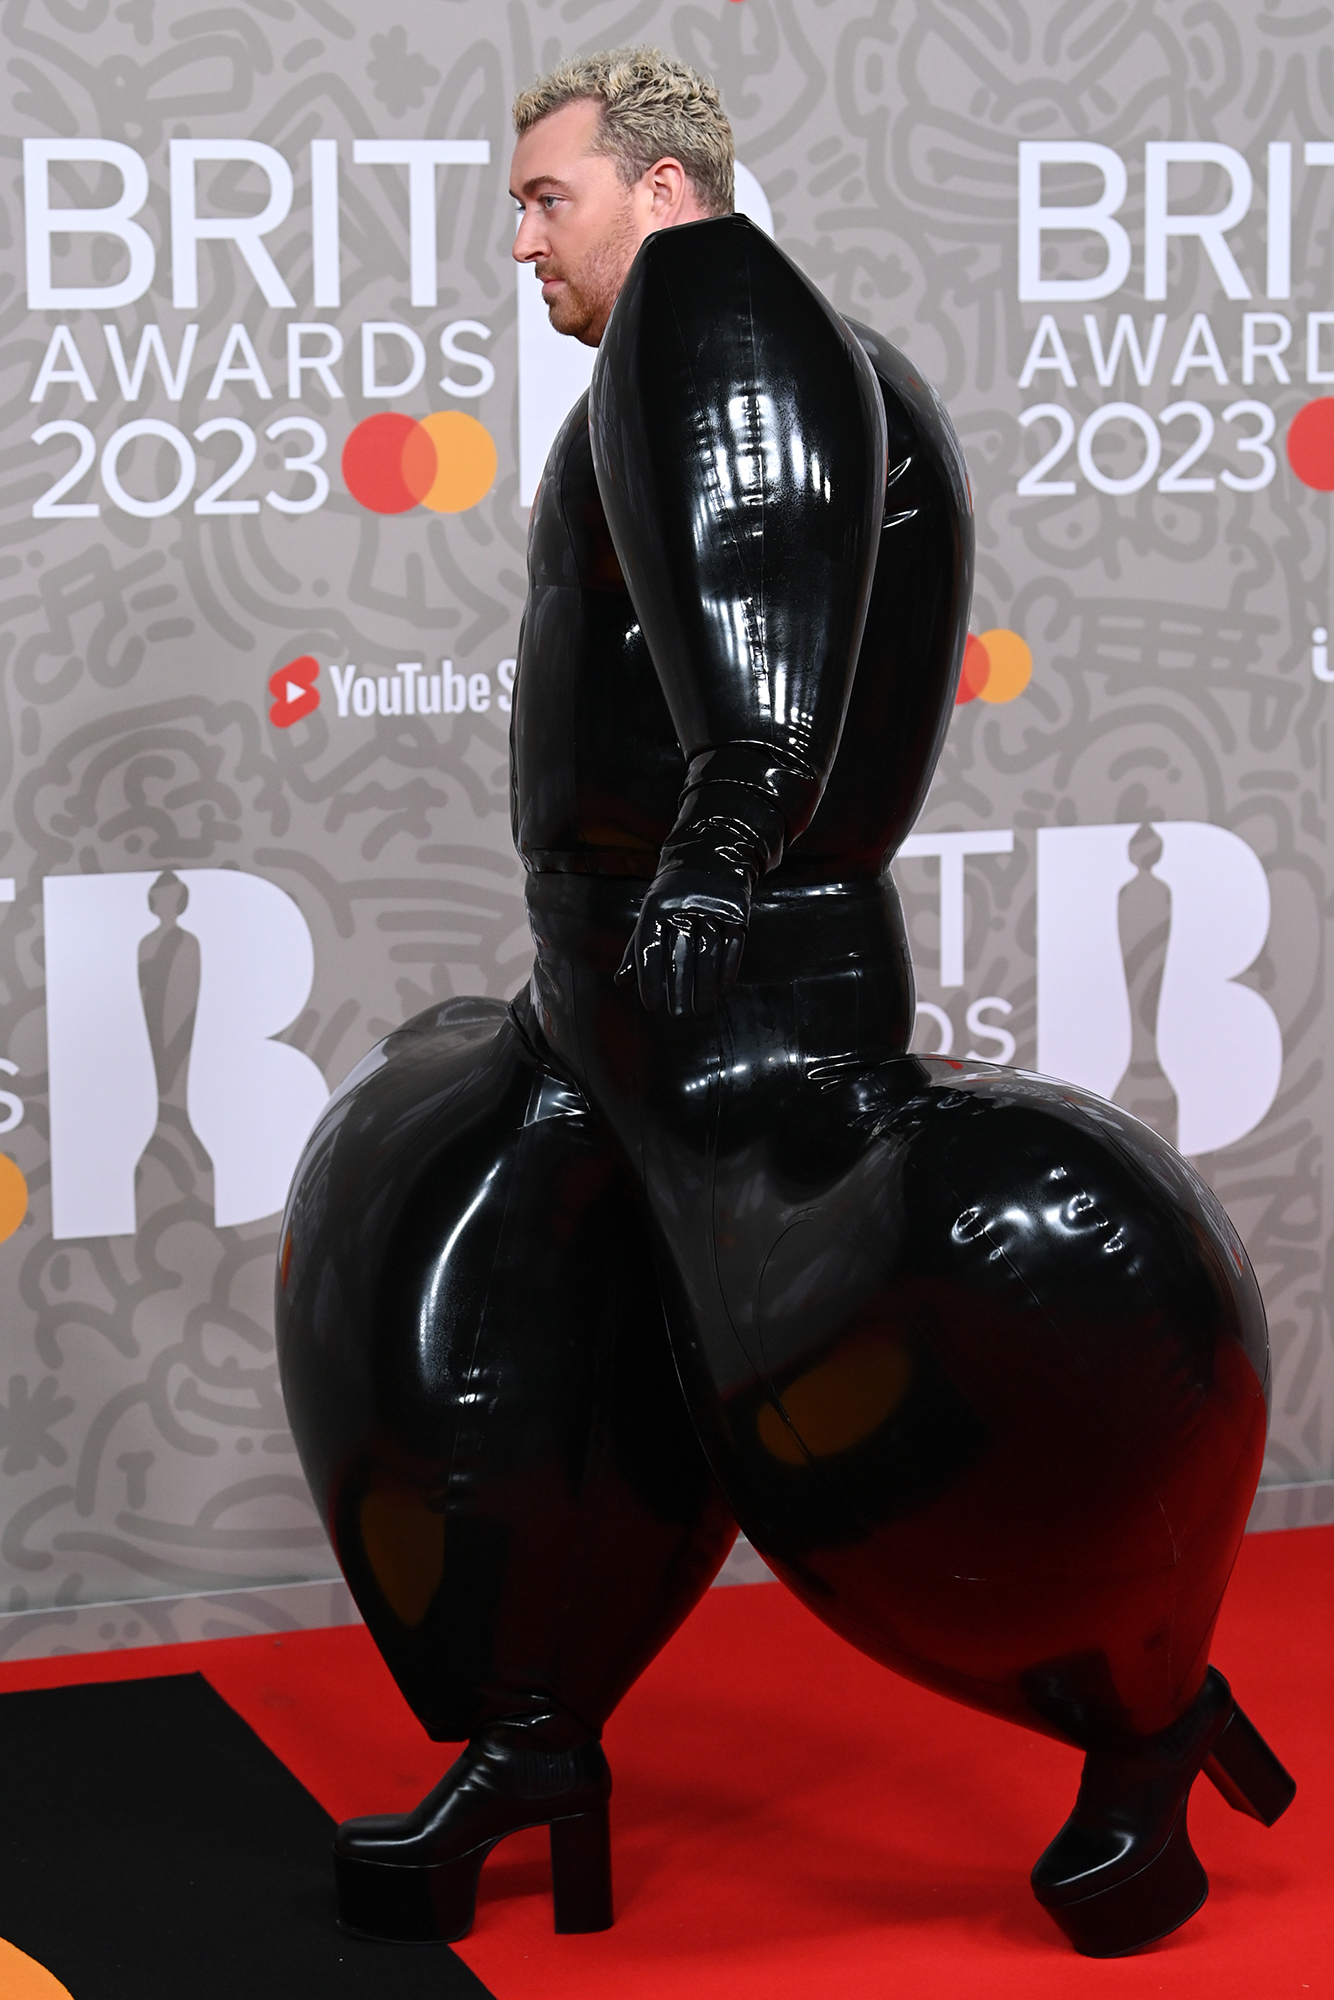 Brit Awards 2023 Sam Smith Wears Latex Jumpsuit on Red Carpet